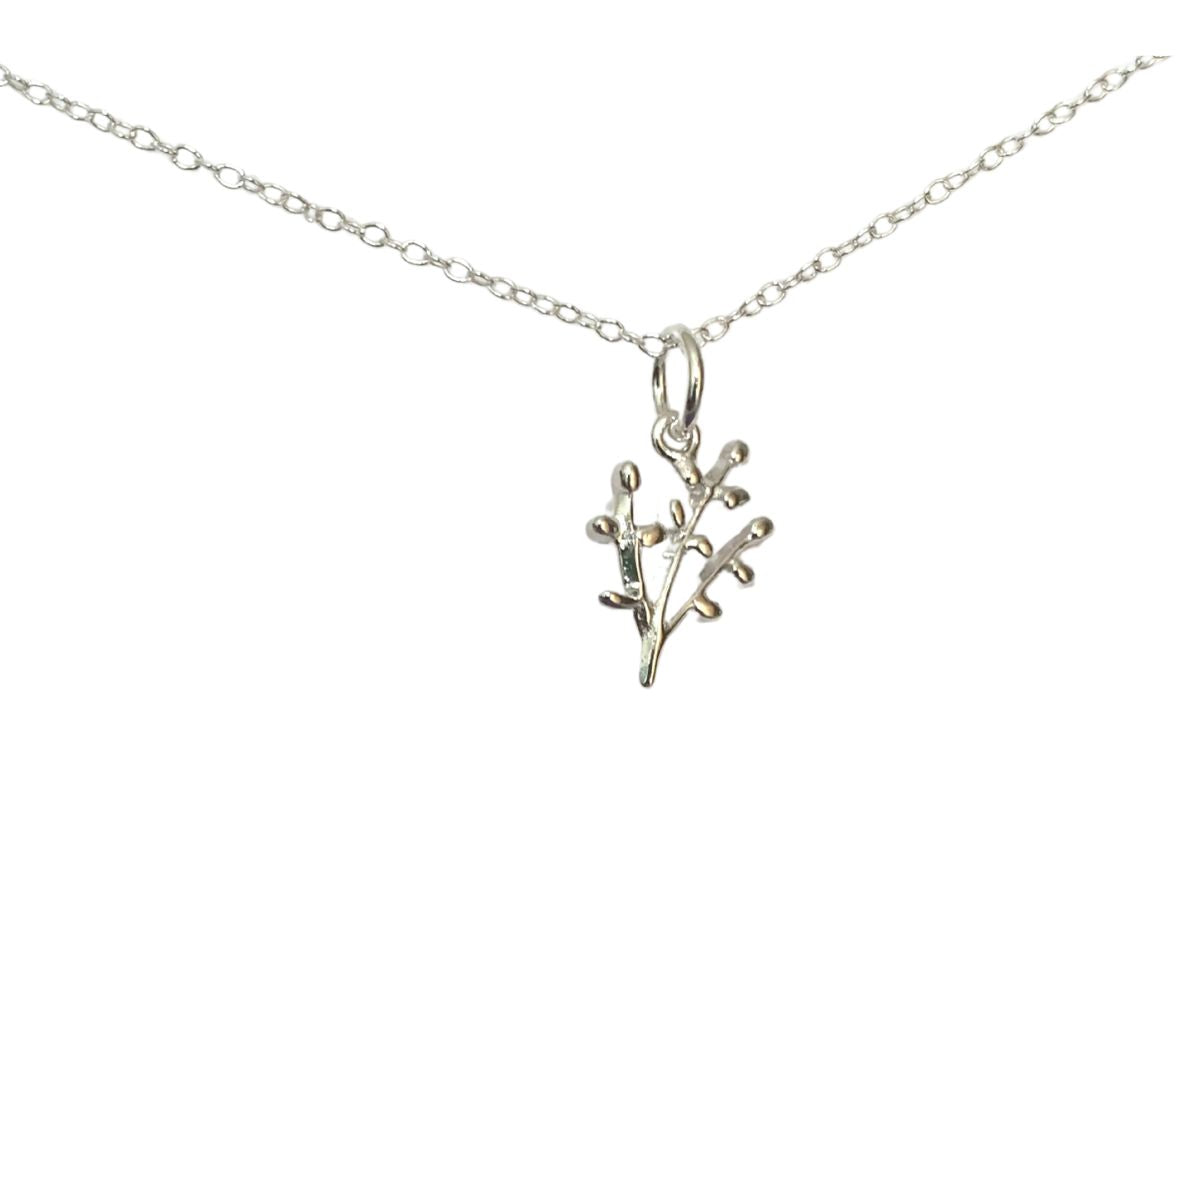 sterling silver chain with a sprig of Scottish Heather as the pendant. 